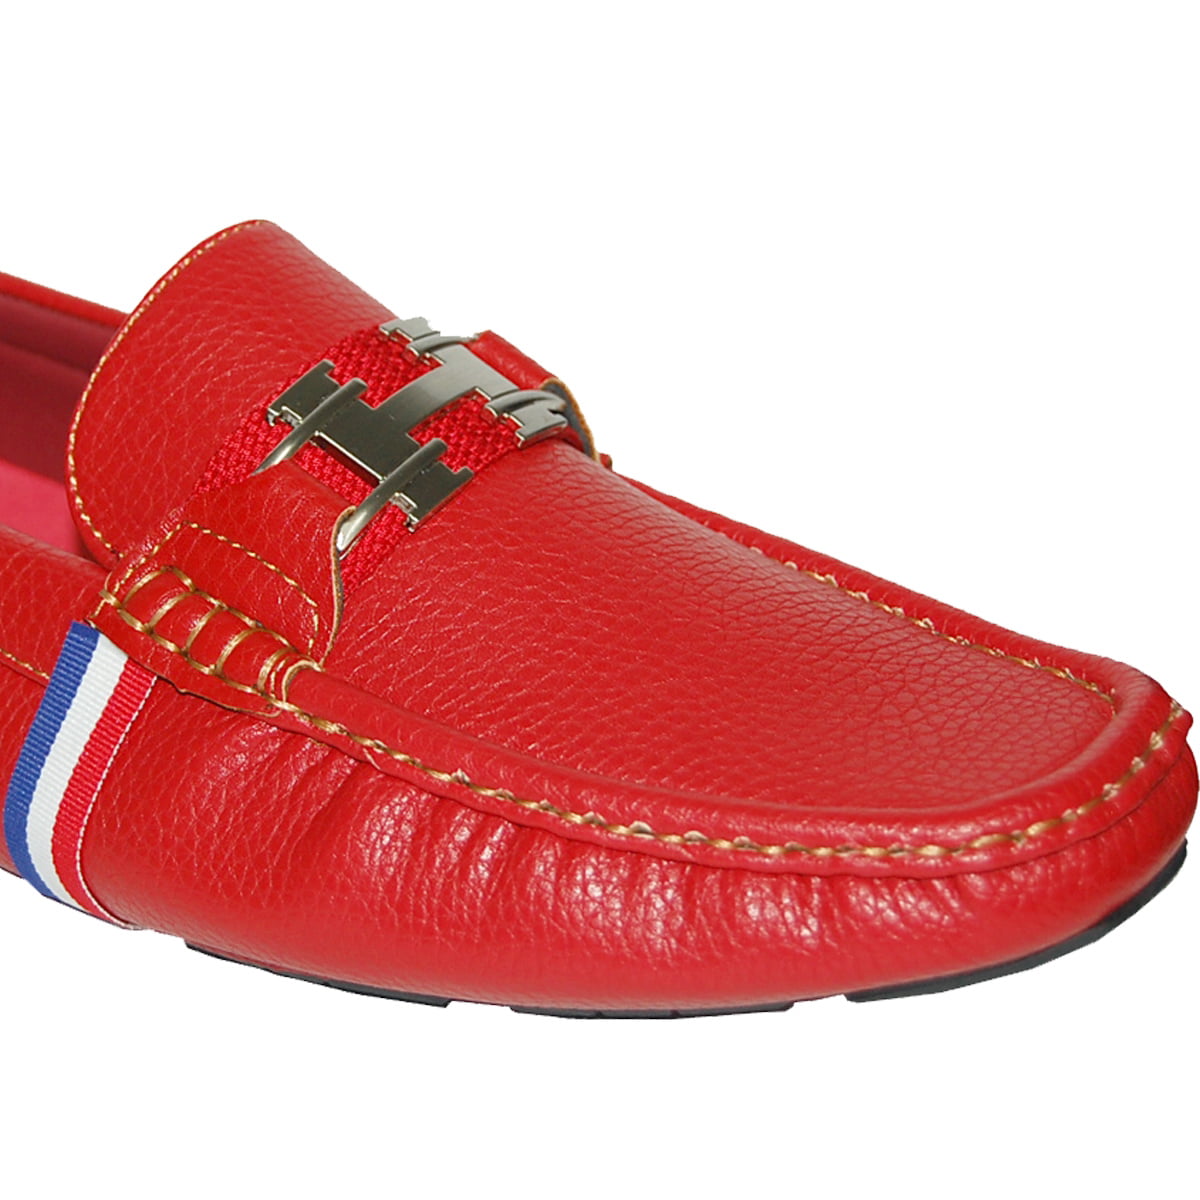 white and red loafers